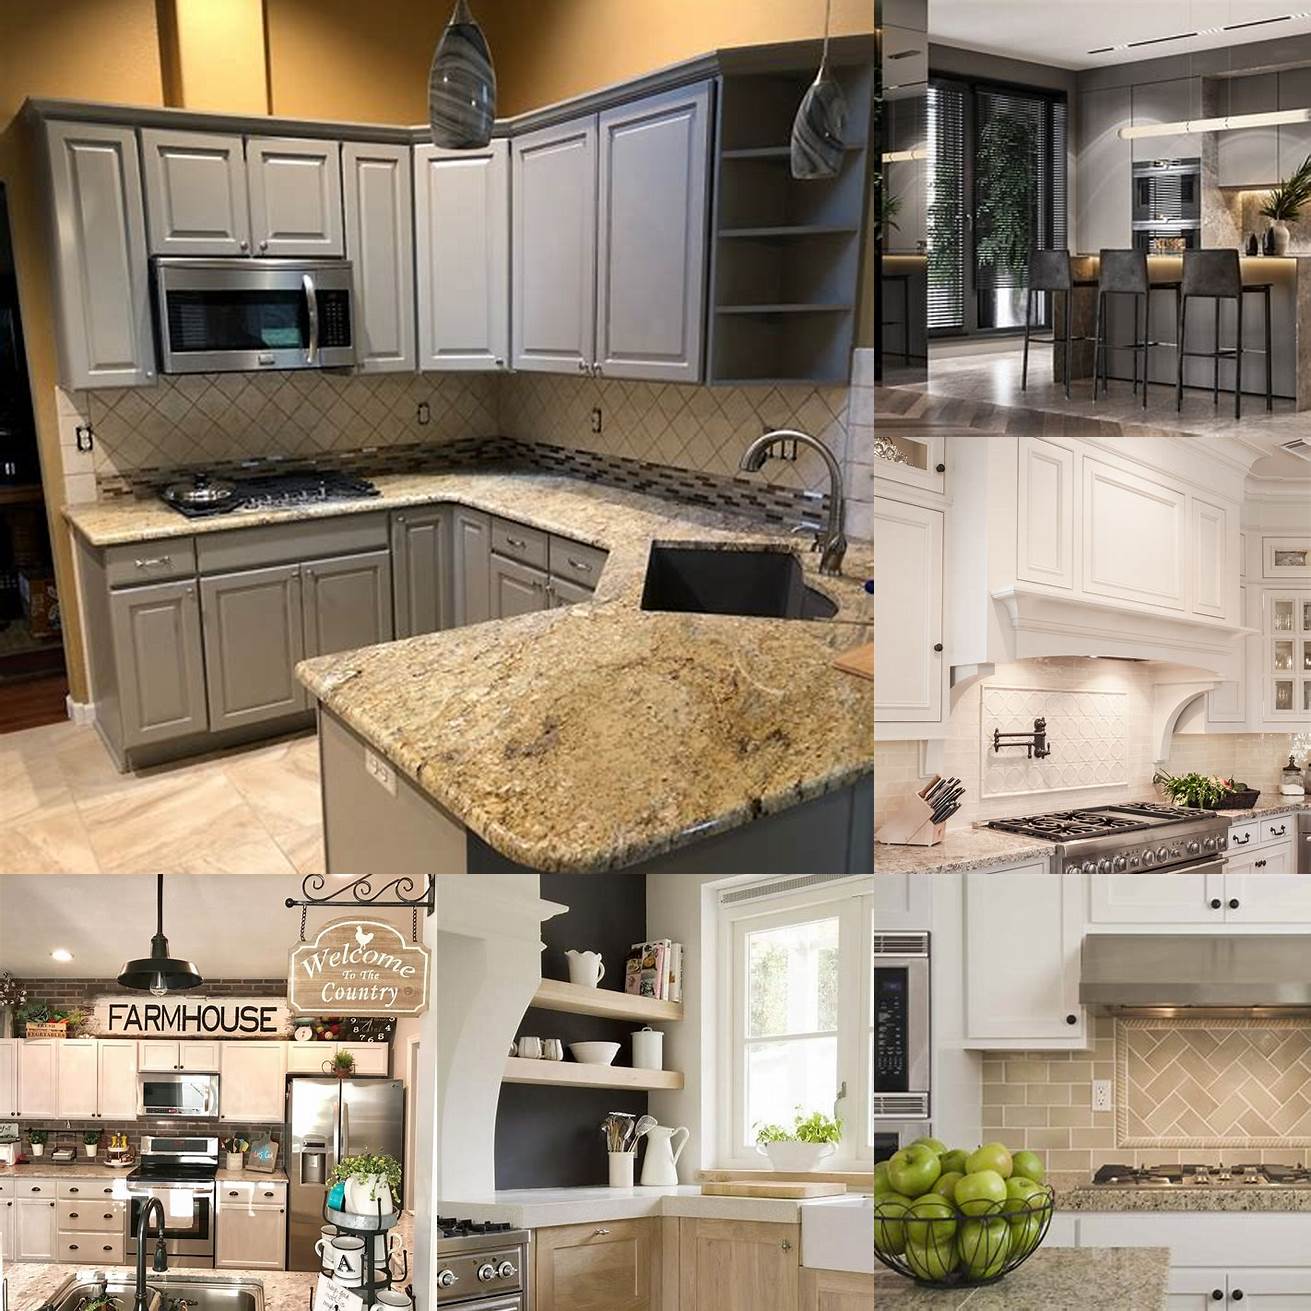 Consider the style and material that will best complement your kitchen decor